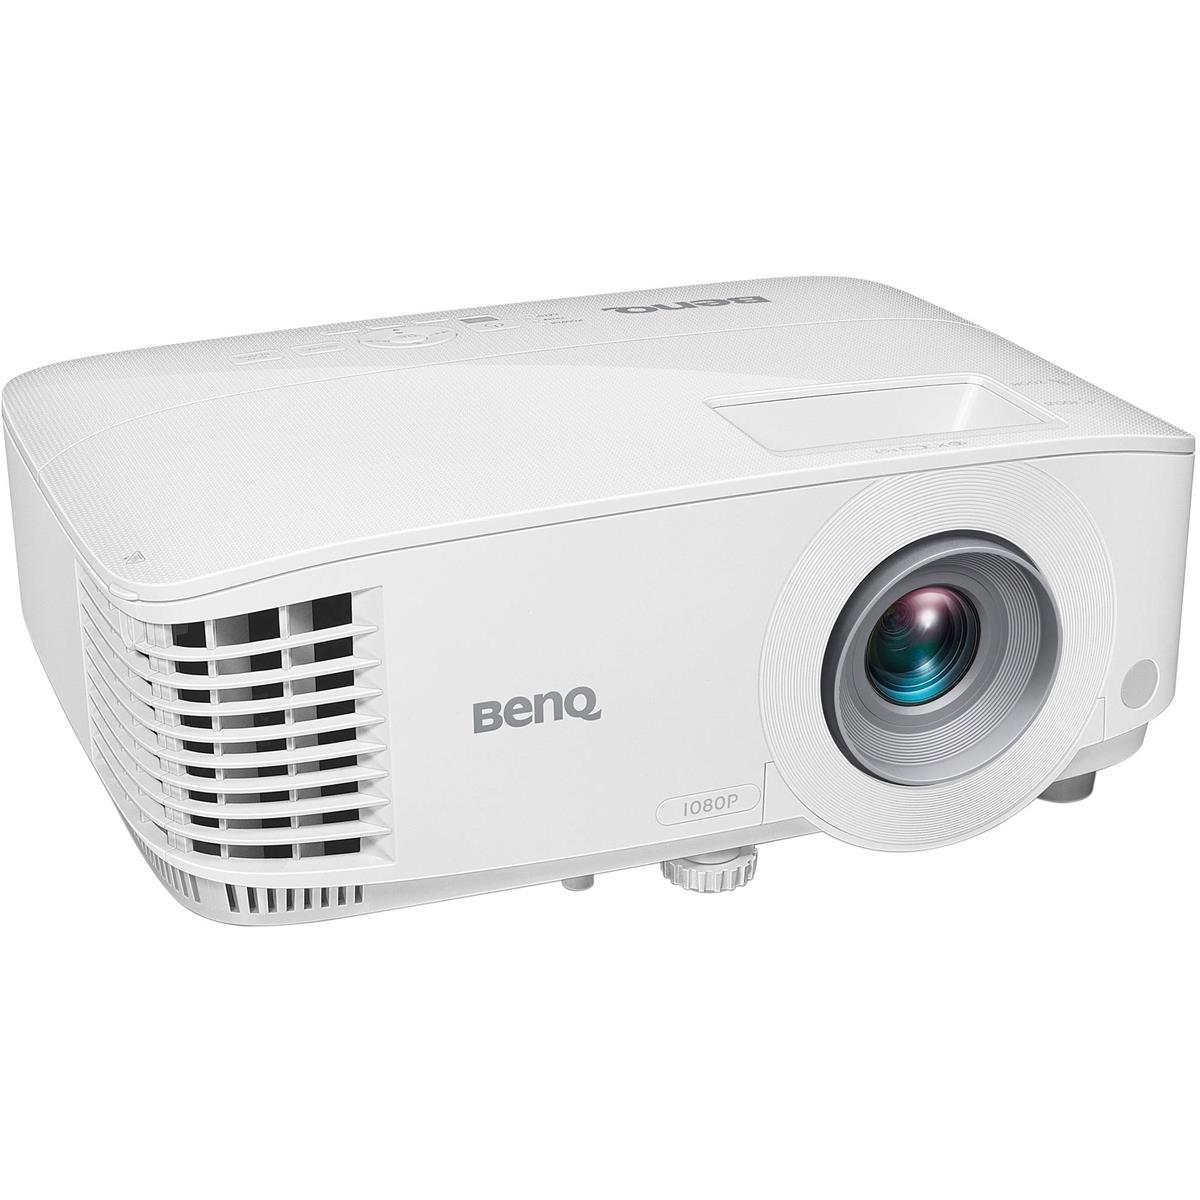 Image of BenQ MH733 Full HD Network Business Projector